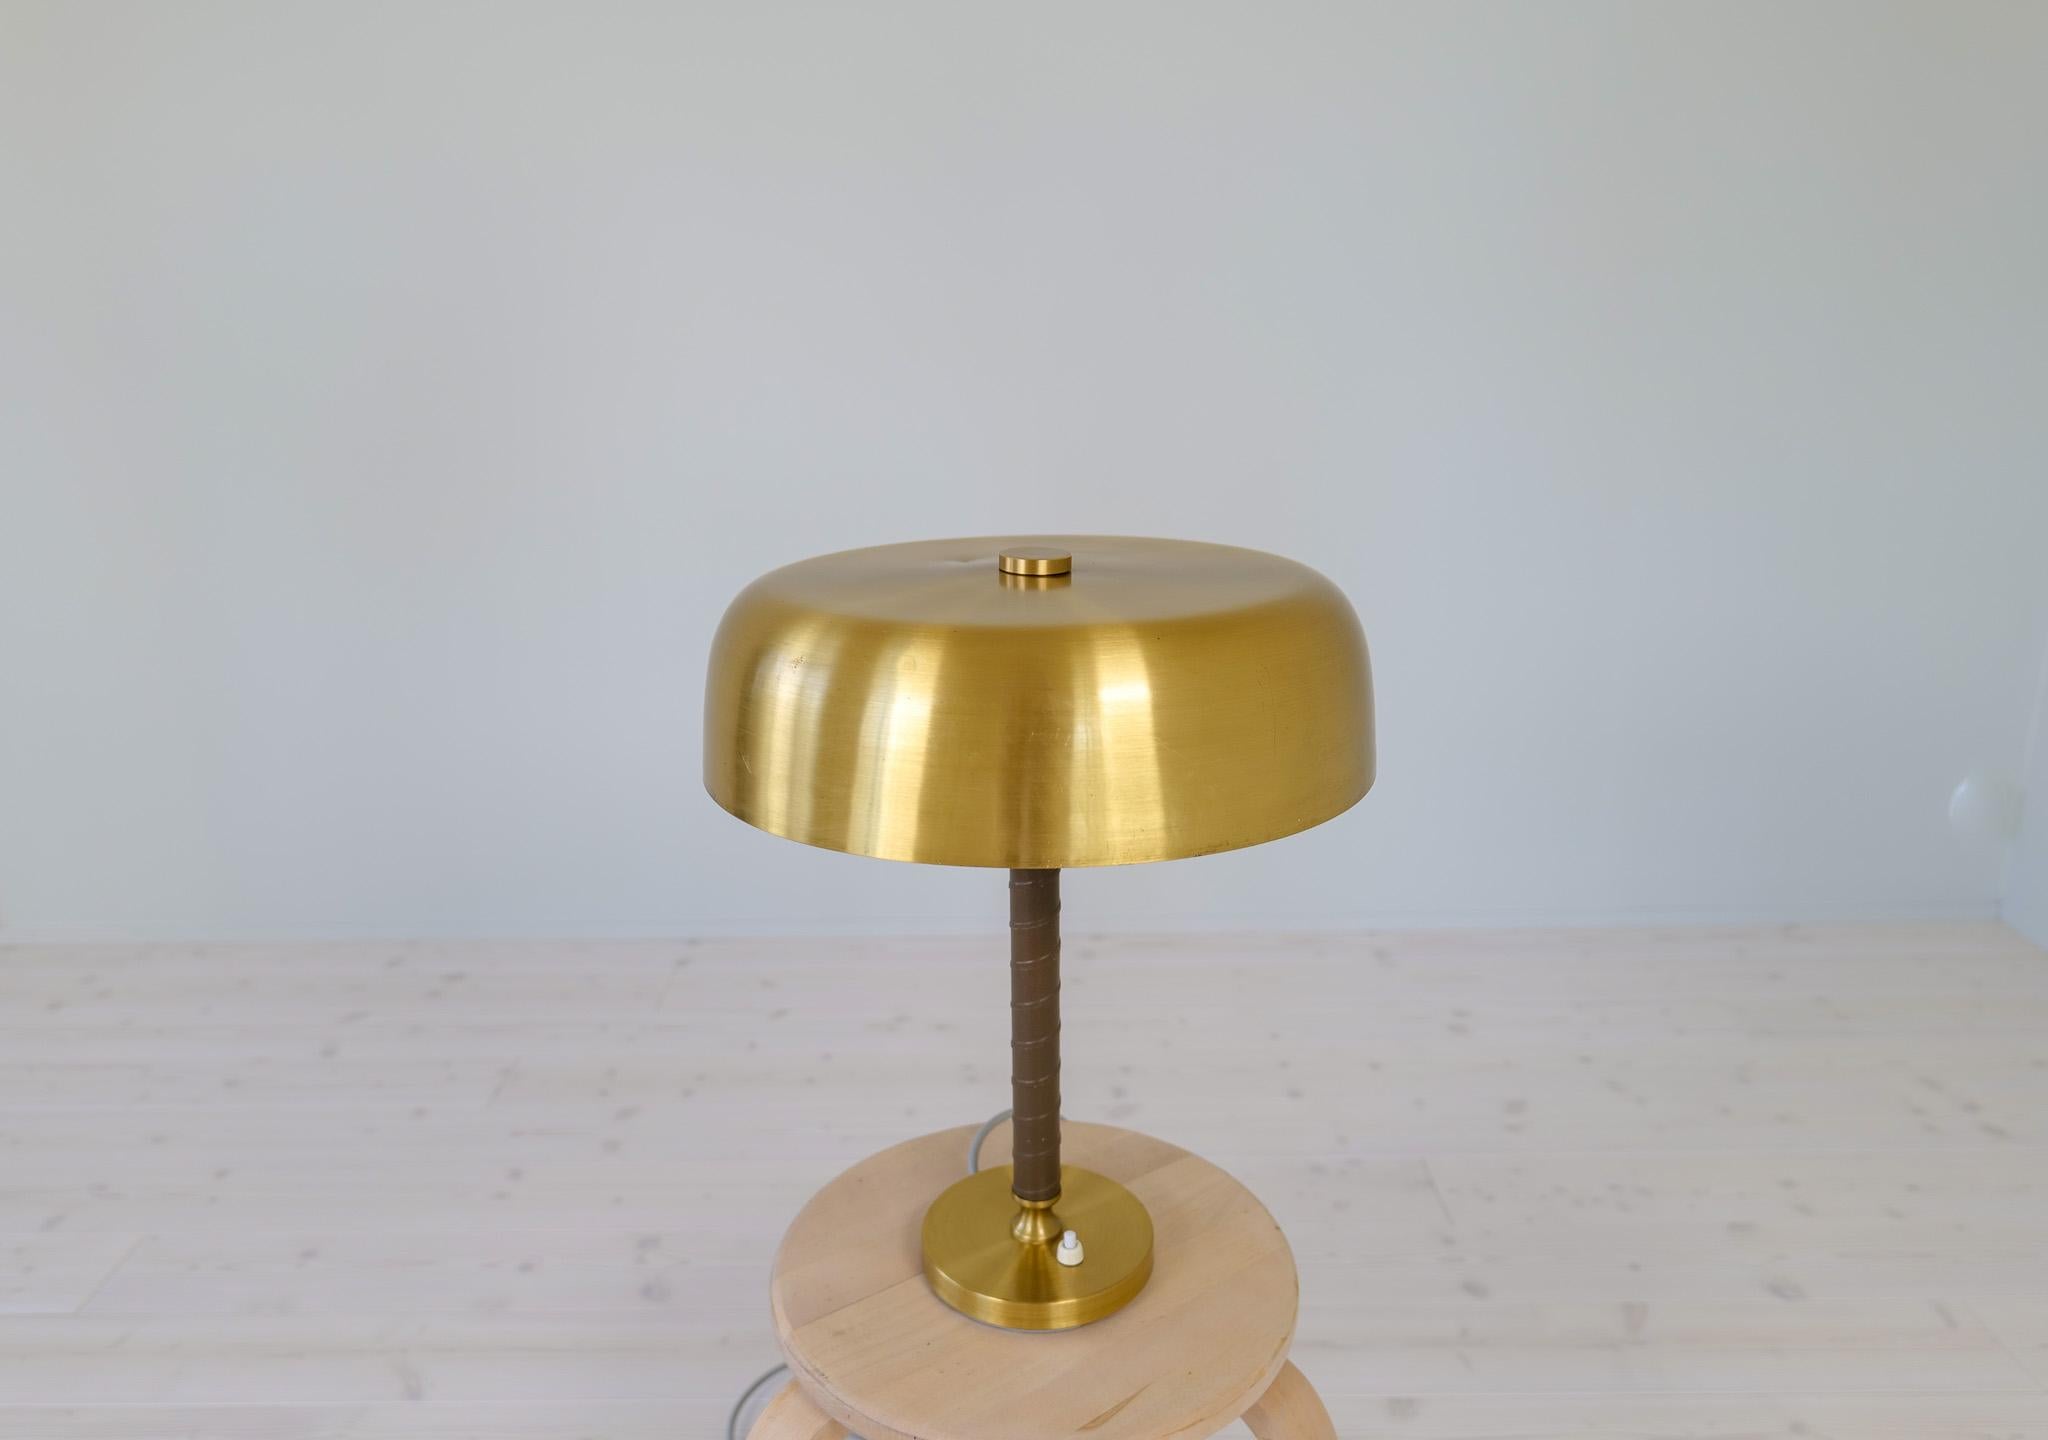 Swedish Midcentury Modern Table Lamp in Brass and Leather by Boréns, Sweden, 1960s For Sale